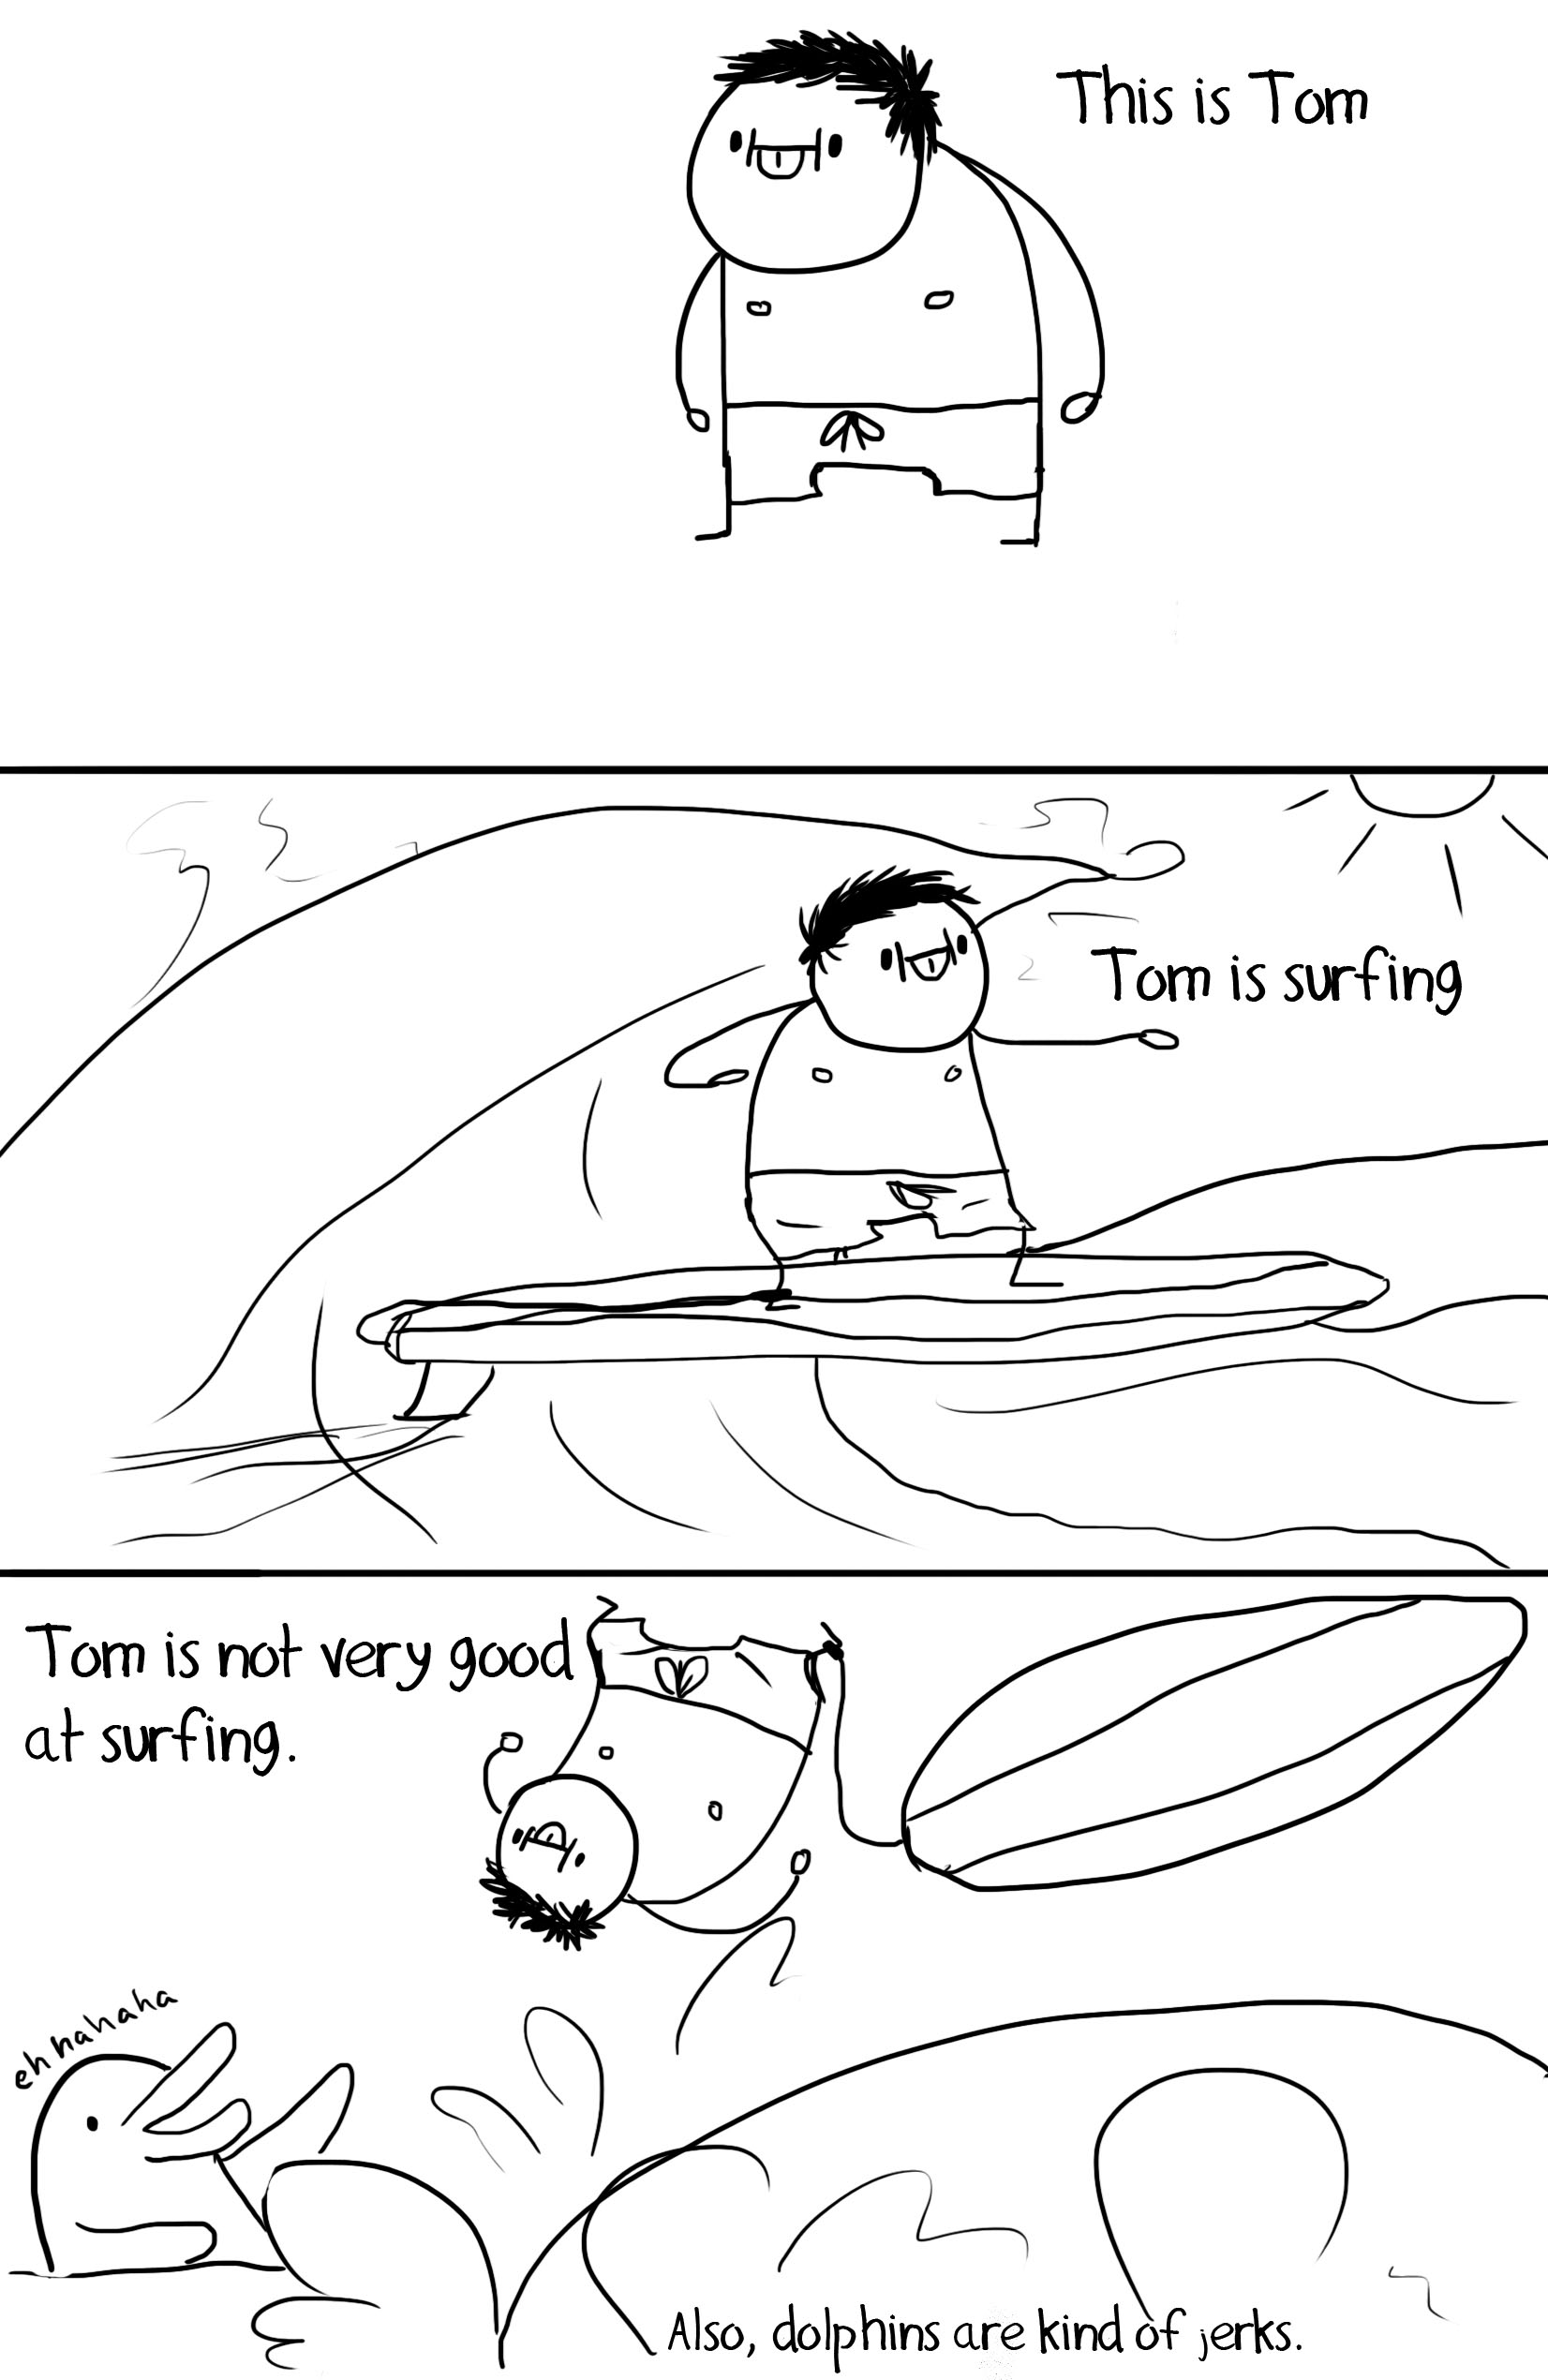 Tom is going surfing